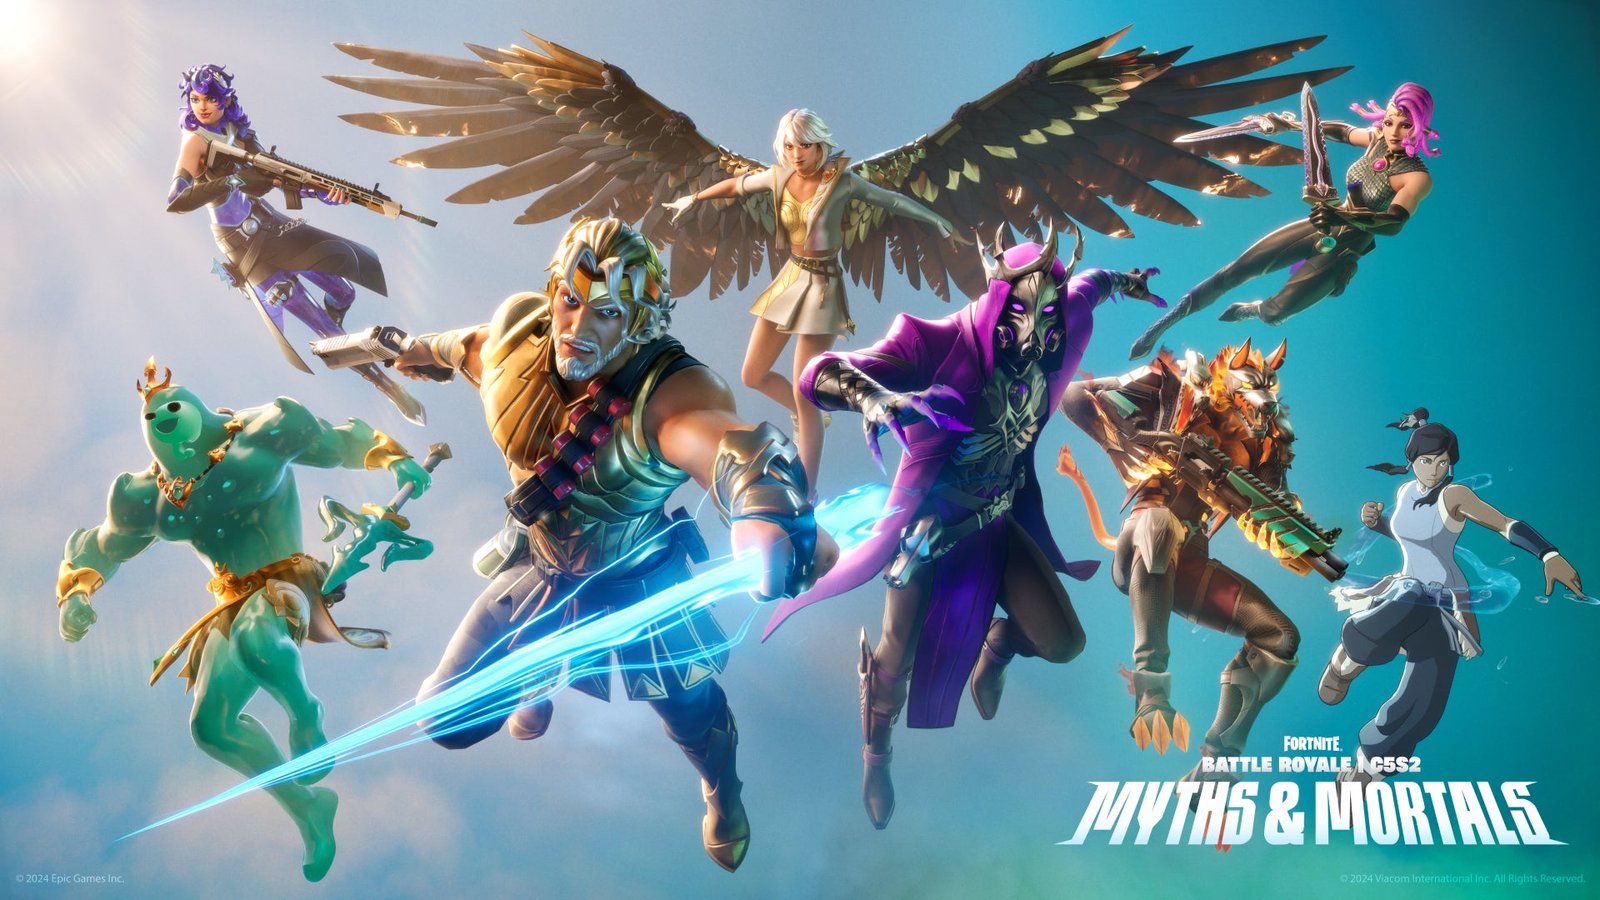 After a Day of Downtime, Fortnite Unveils the 'Myths & Mortals' Update